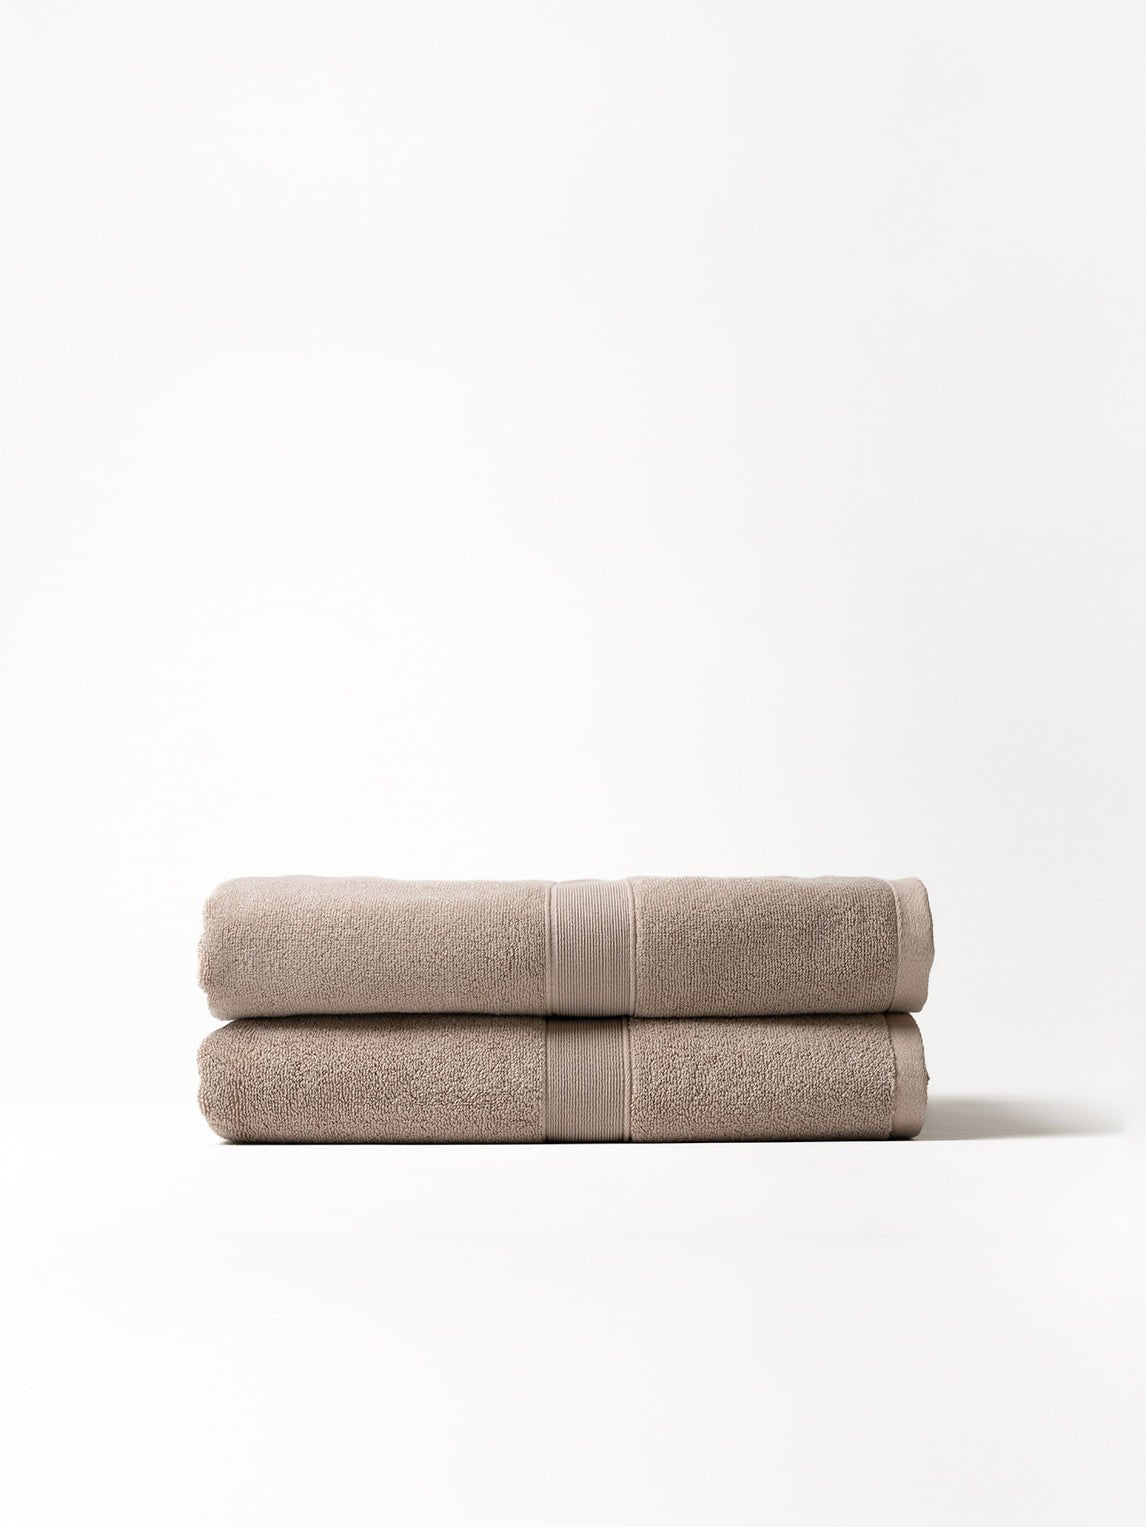 Two luxe bath sheets folded with white background 